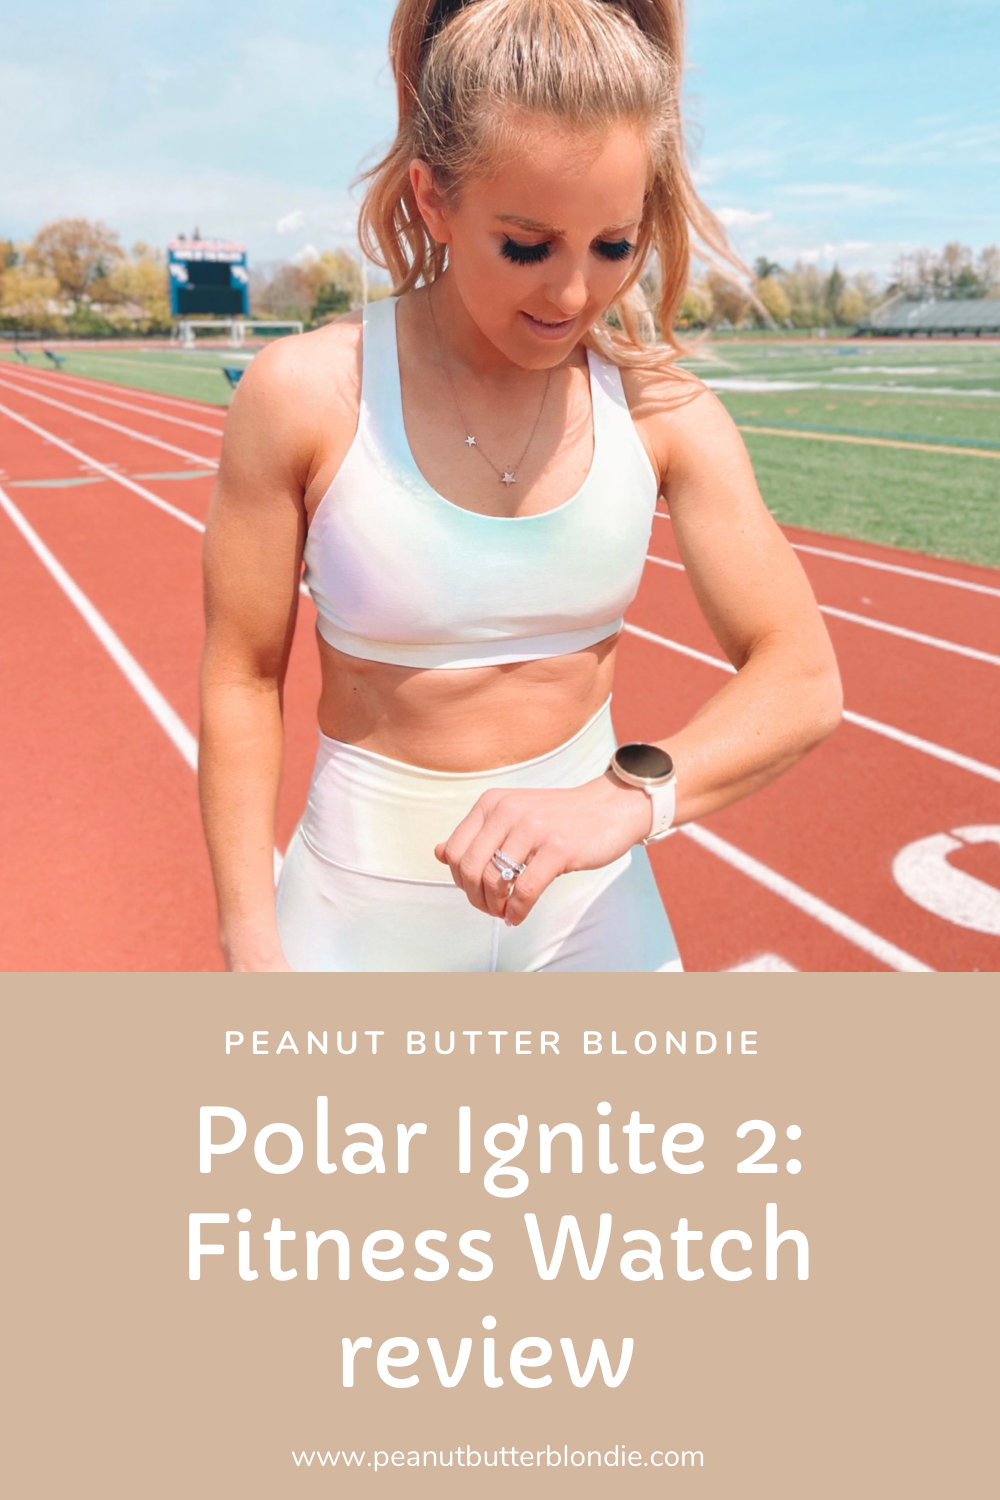 Polar Ignite 2: Fitness Watch Review — PEANUT BUTTER BLONDIE